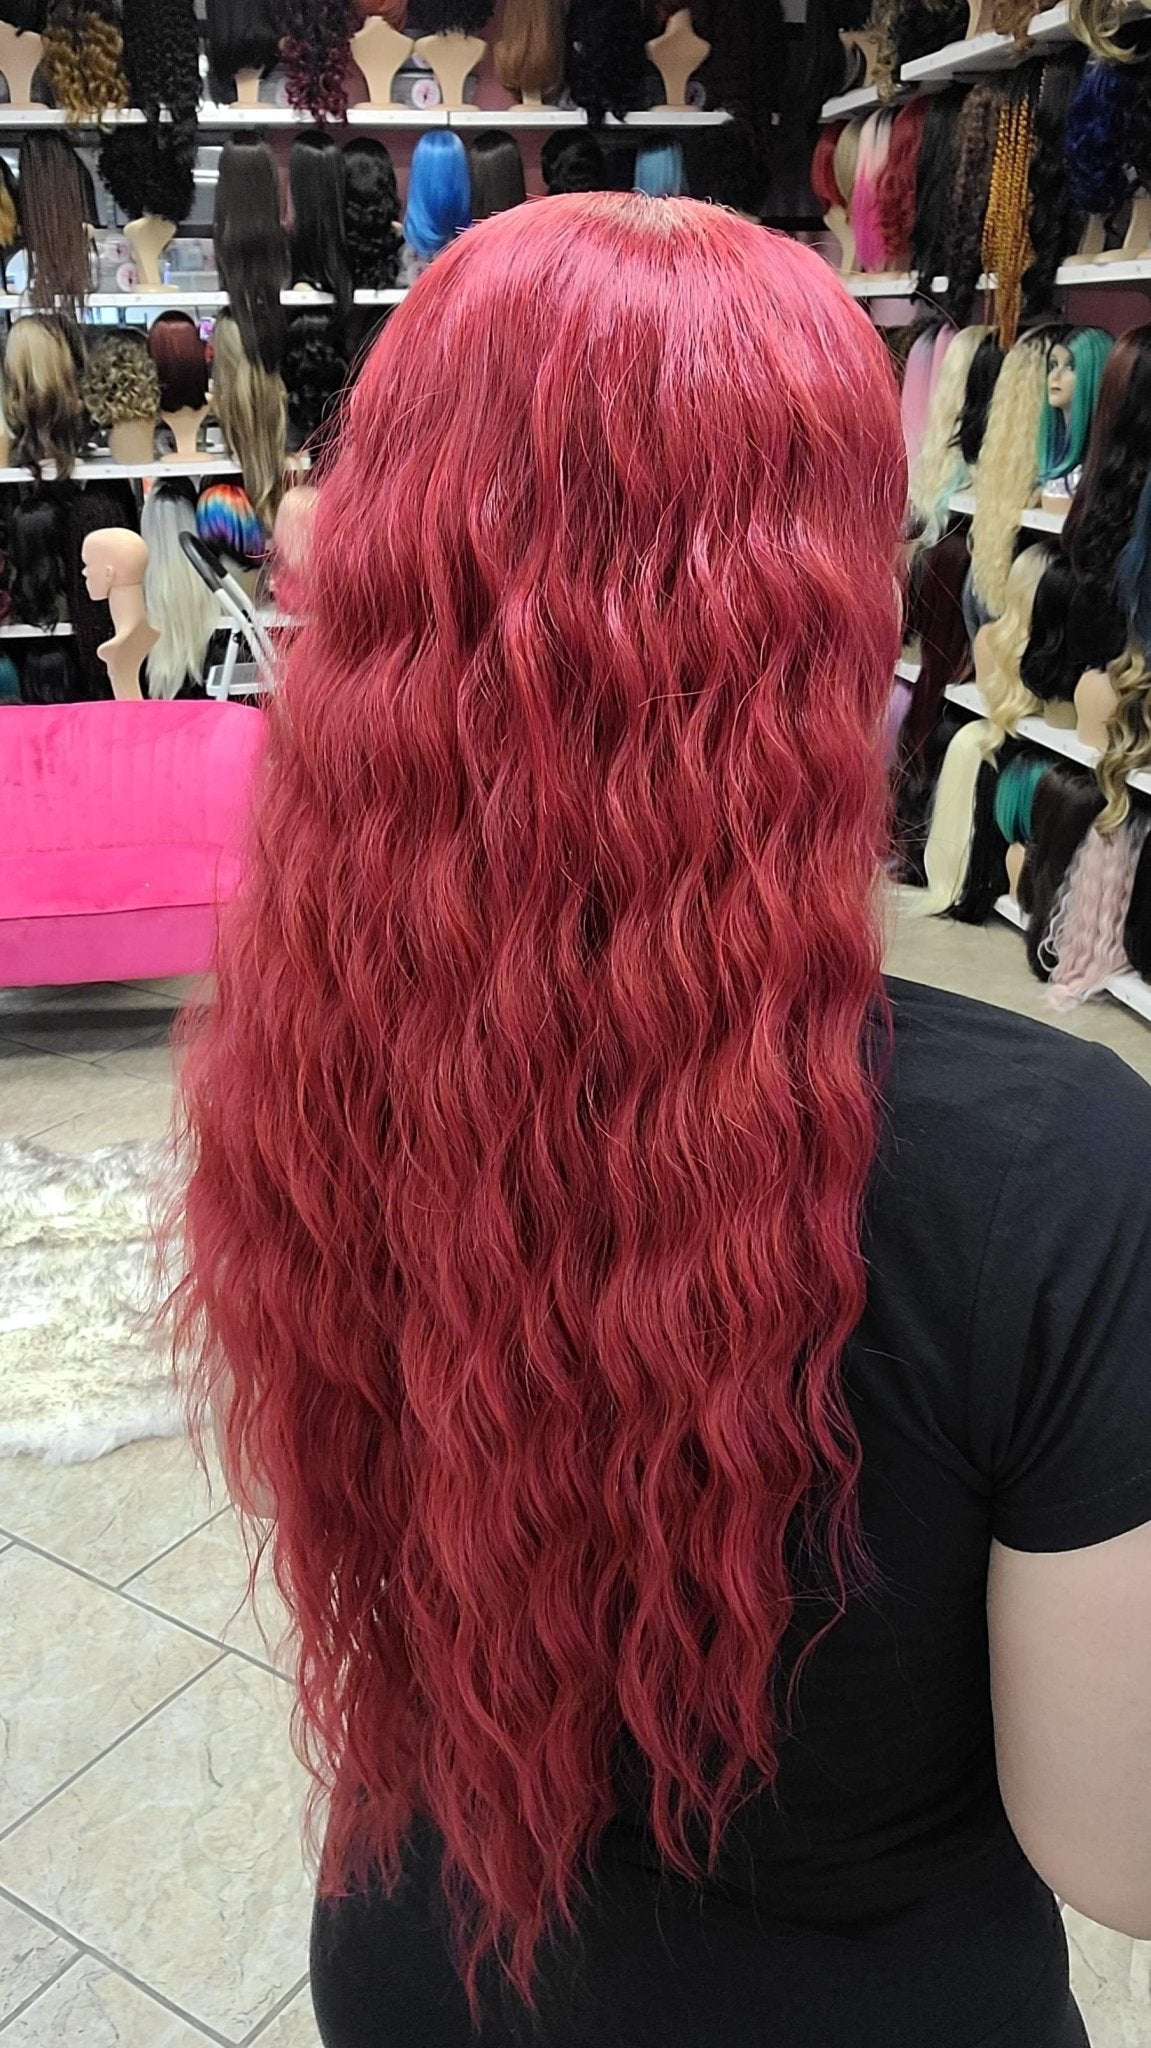 213 Brittney - Middle Part Lace Front Wig Human Hair Blend- RED - DaizyKat Cosmetics 213 Brittney - Middle Part Lace Front Wig Human Hair Blend- RED DaizyKat Cosmetics Wigs